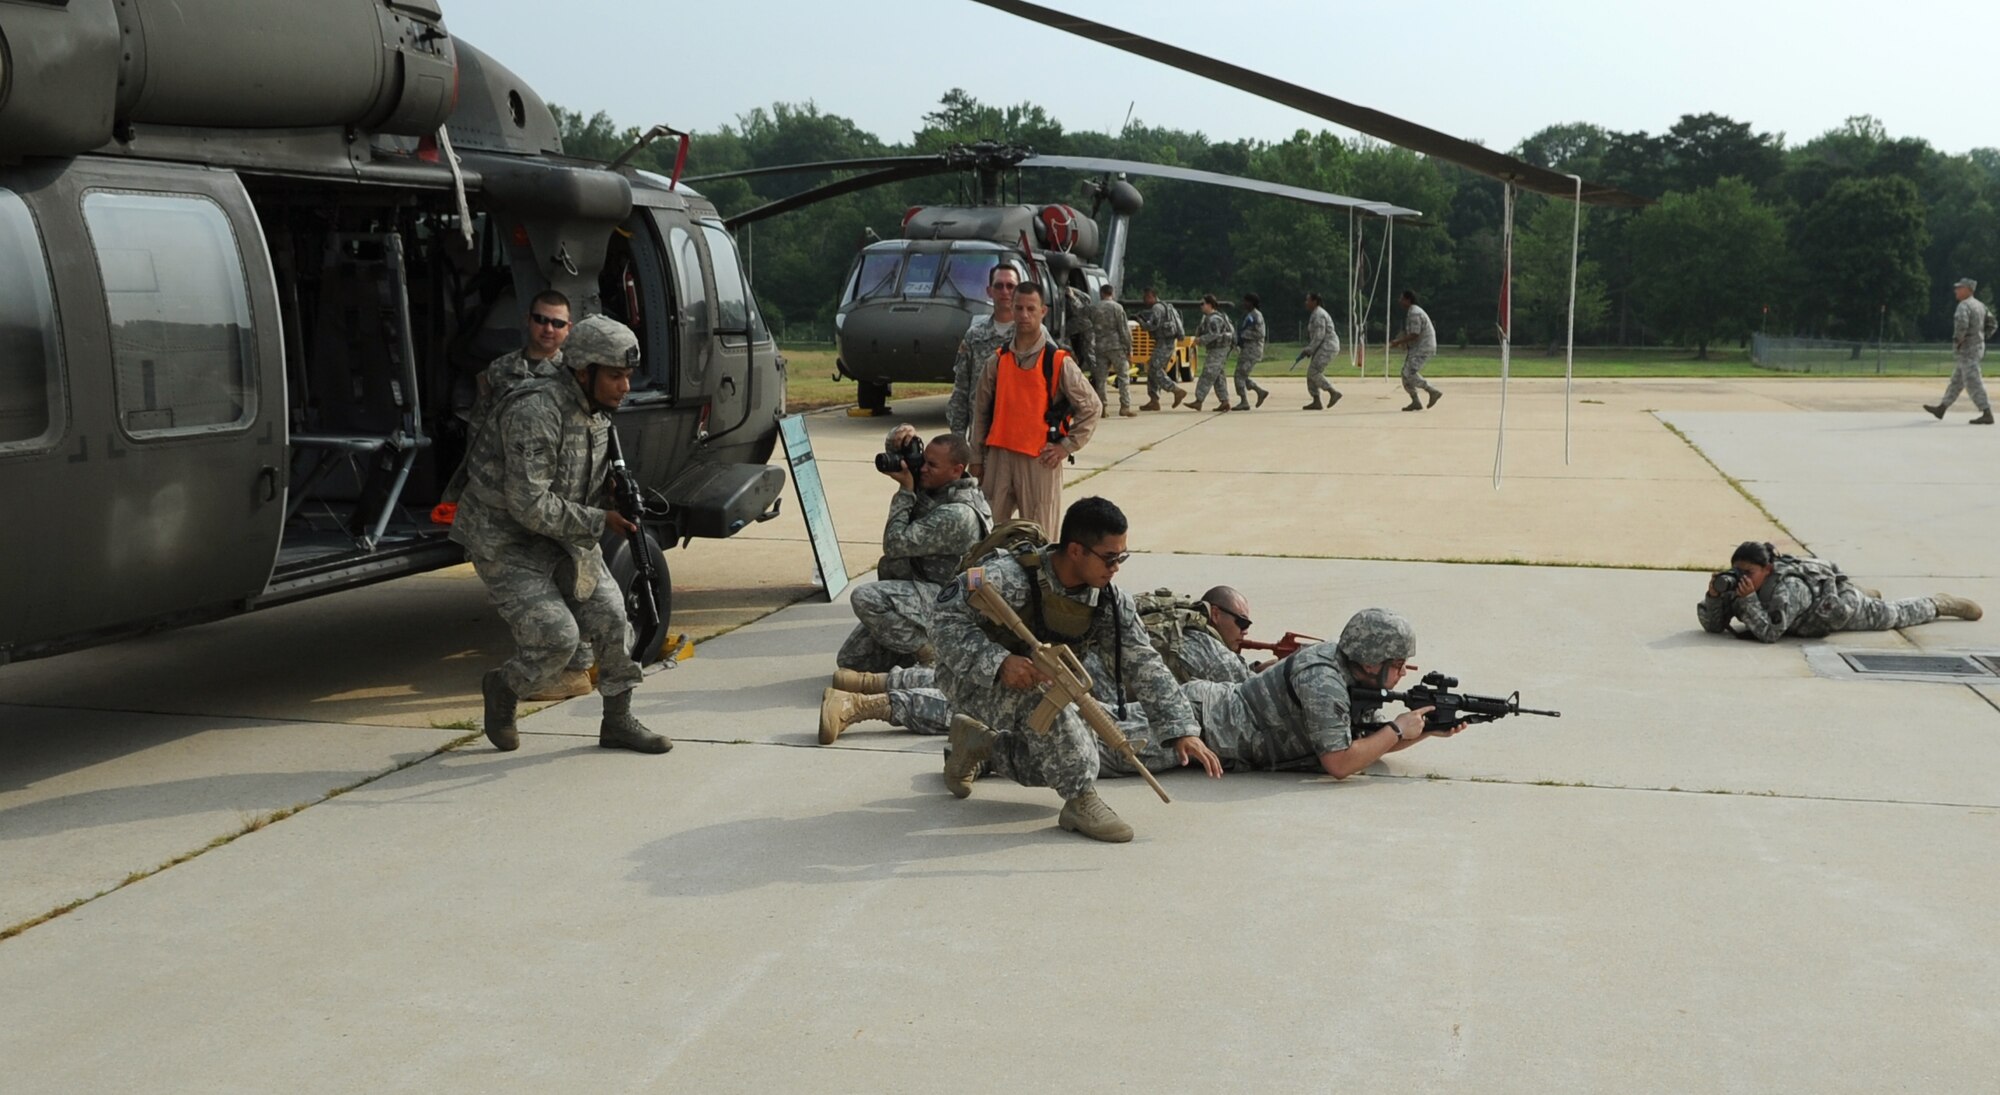 Airmen from the 11th Wing Security Forces Squadron and Soldiers from the 55th Signal Company unload from a static CH-60 Black Hawk as they train for airborne operations at Davidson Airmy Airfeild, Va., July 19.  The training familiarized servicemembers with getting in to and out of helicopters in a deployed environment.  Combat Cameramen from the 55th Signal Company embedded with the Defenders as they trained combat operations as well. (U.S. Air Force photo by Senior Airman Torey Griffith)